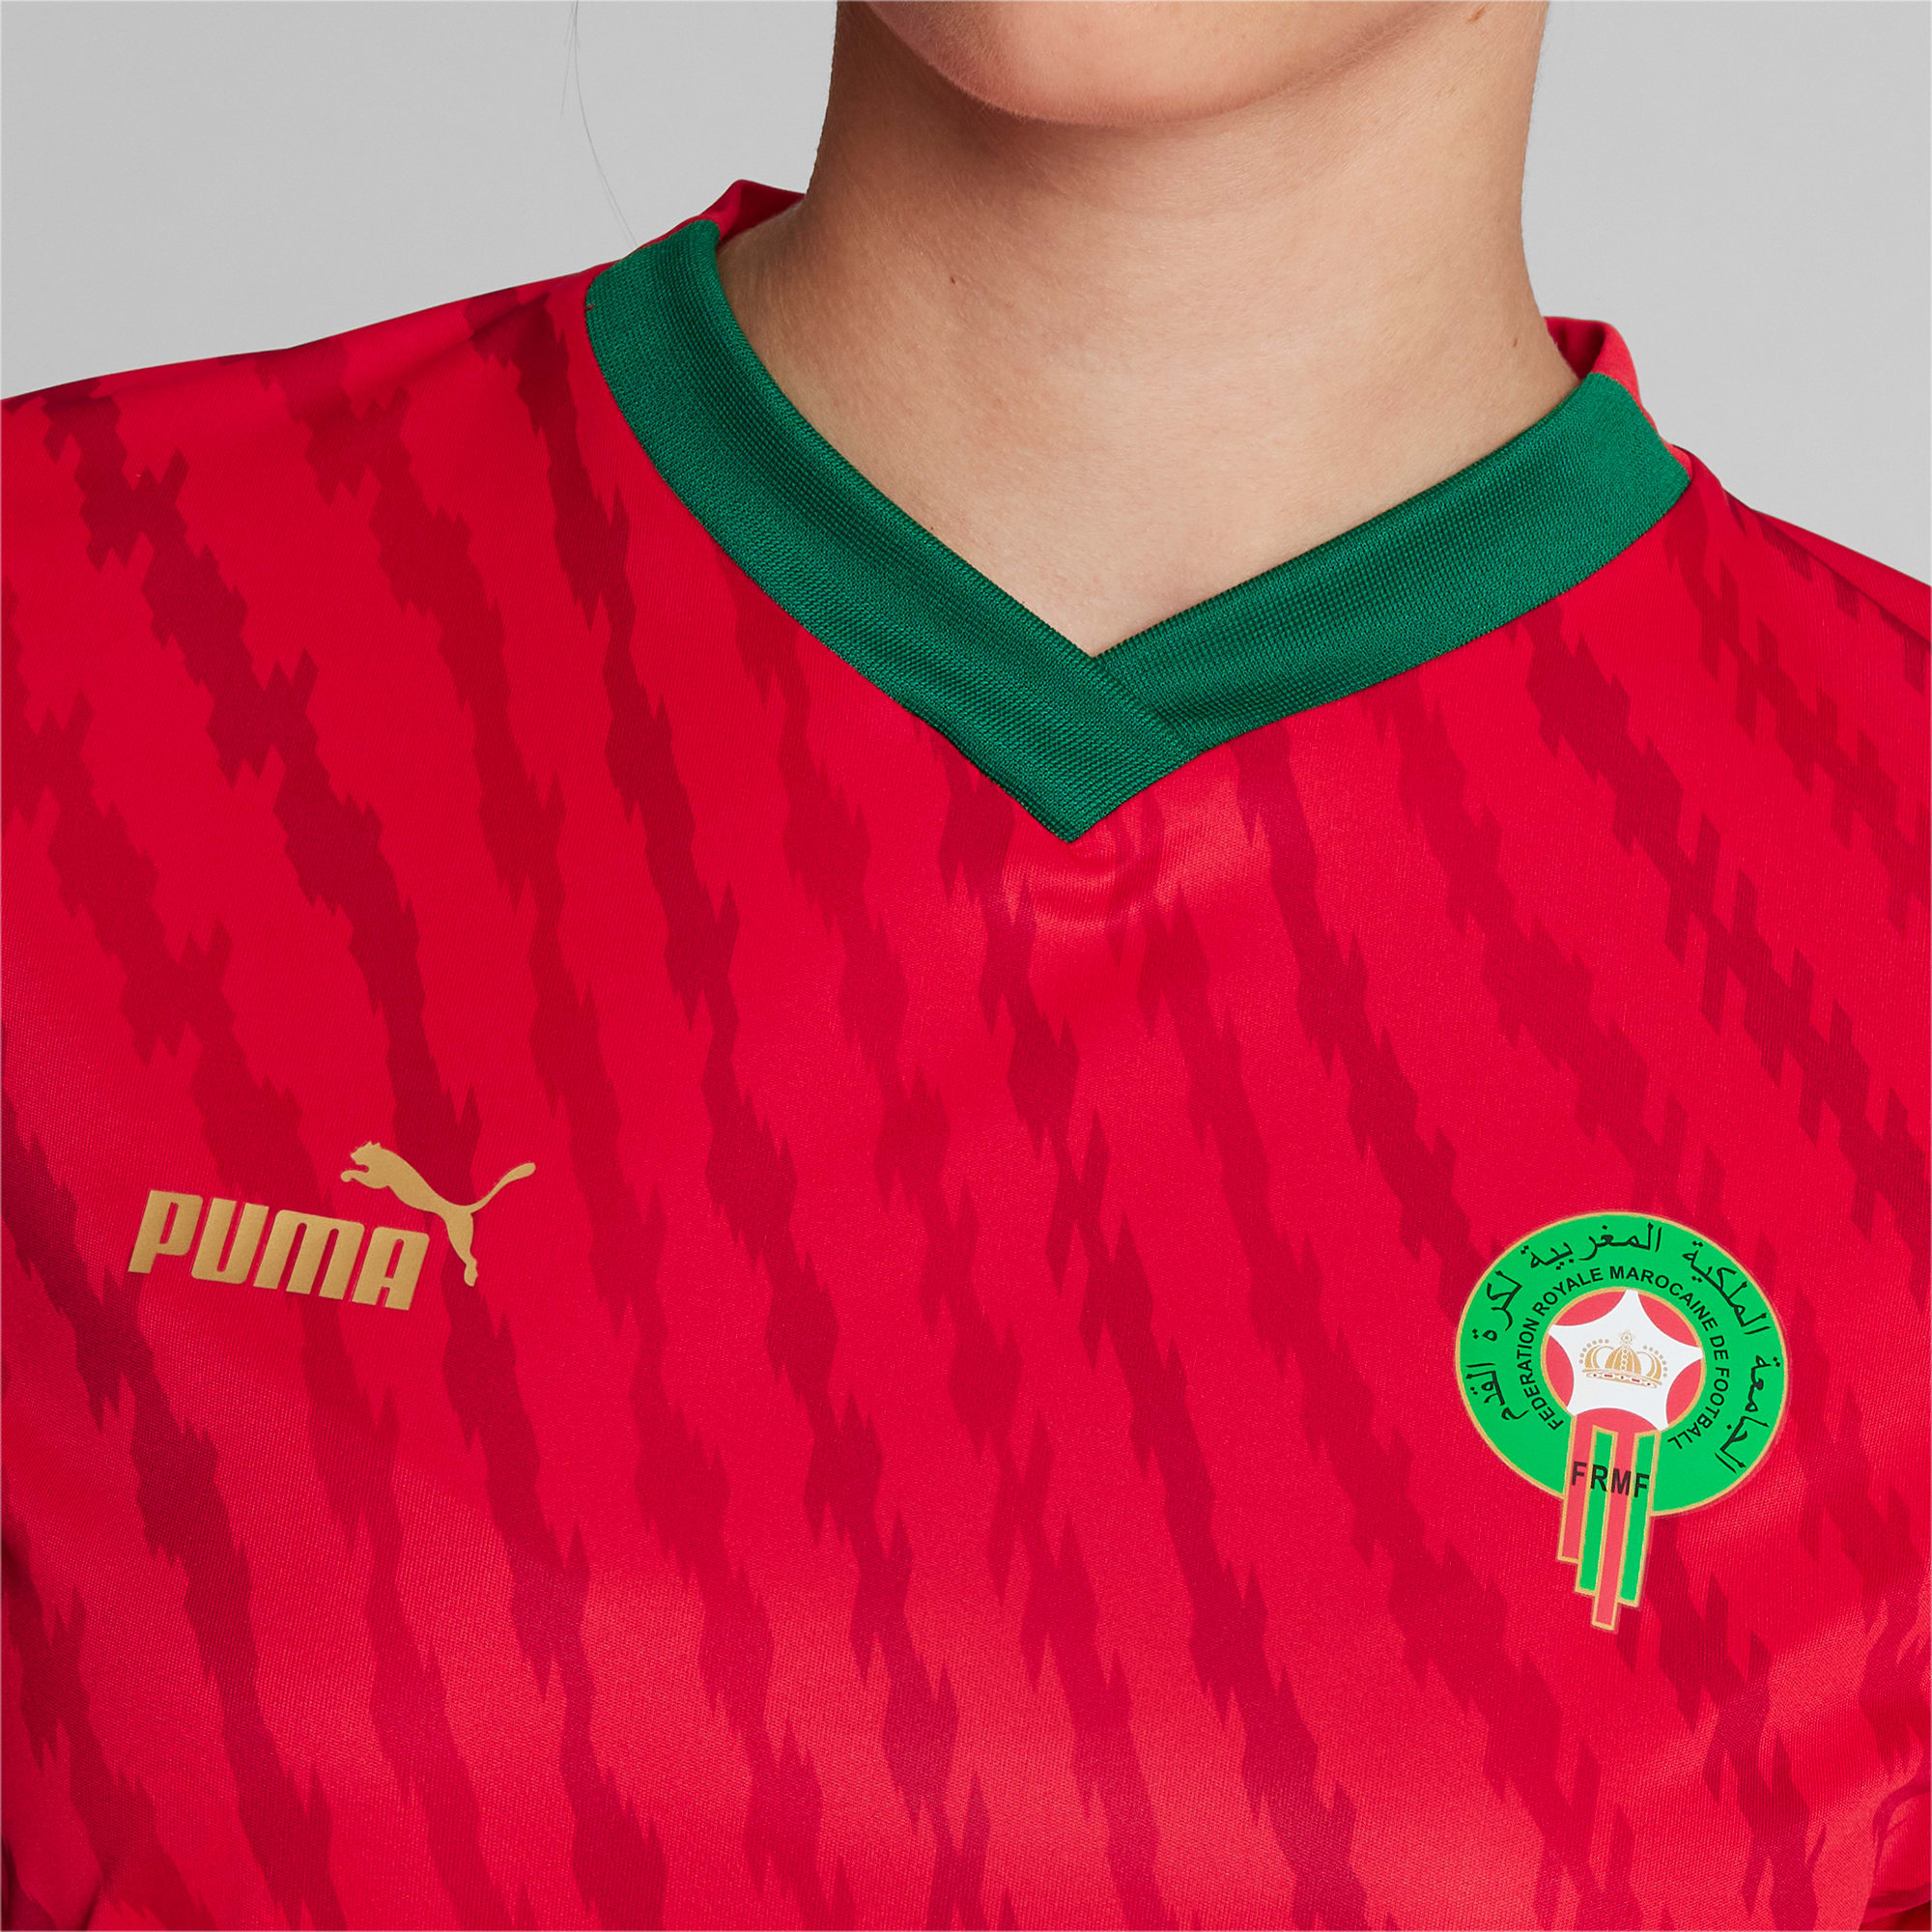 Maillot Maroc CAN 23/24 Rouge Gold Collection Mosaïque By Maroco